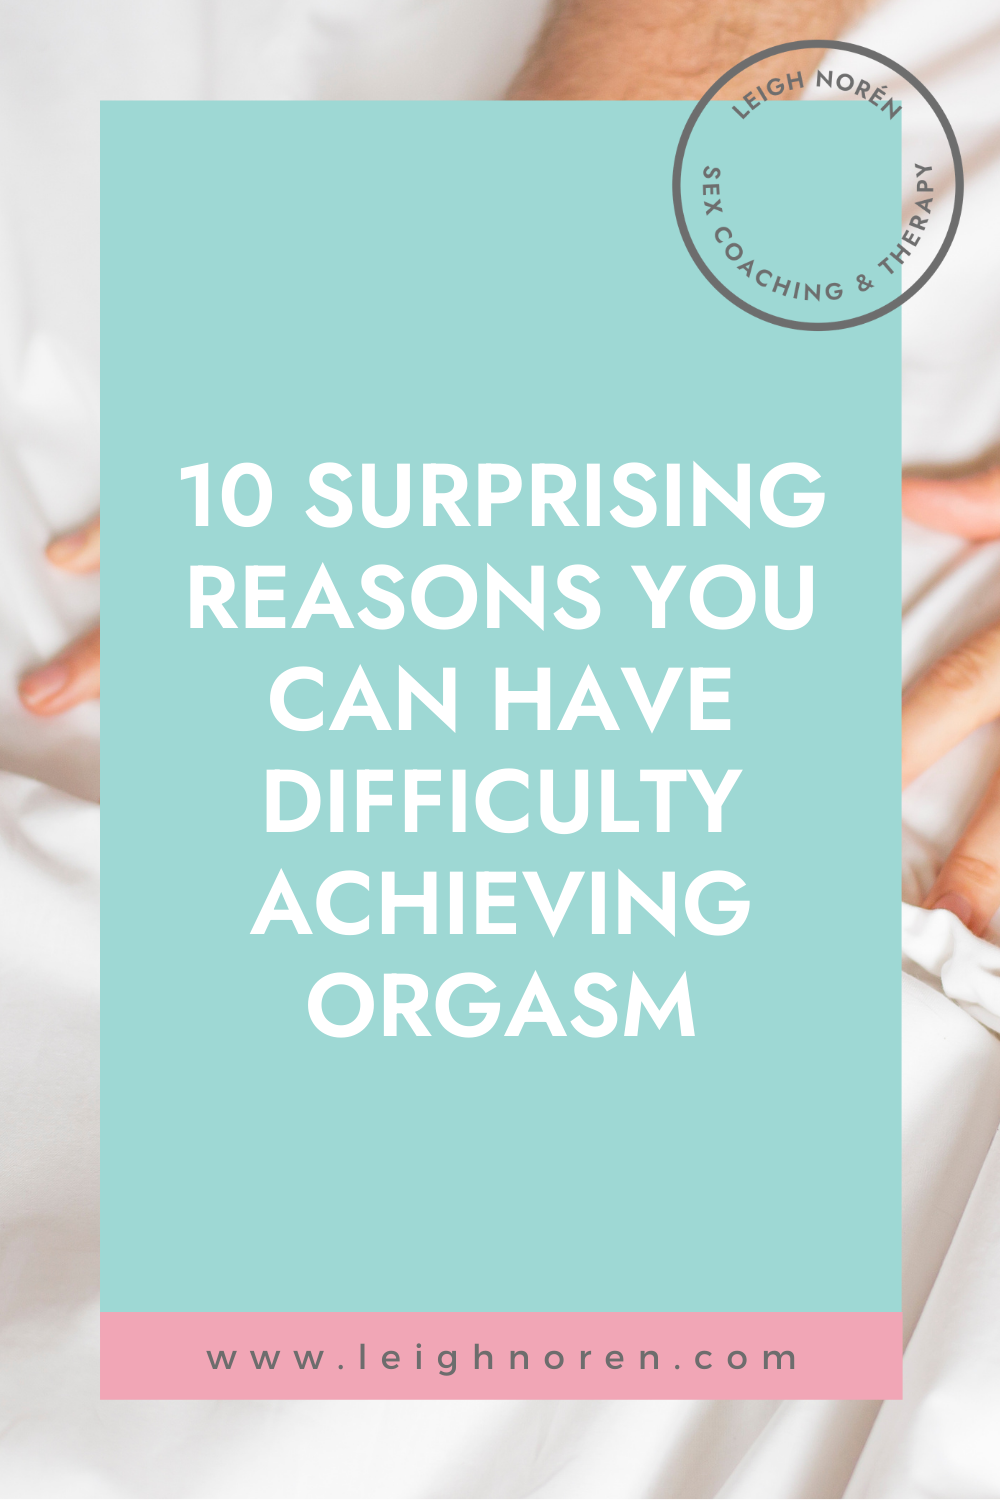 Orgasm Anxiety: Causes, Treatments & How To Cope - Questions